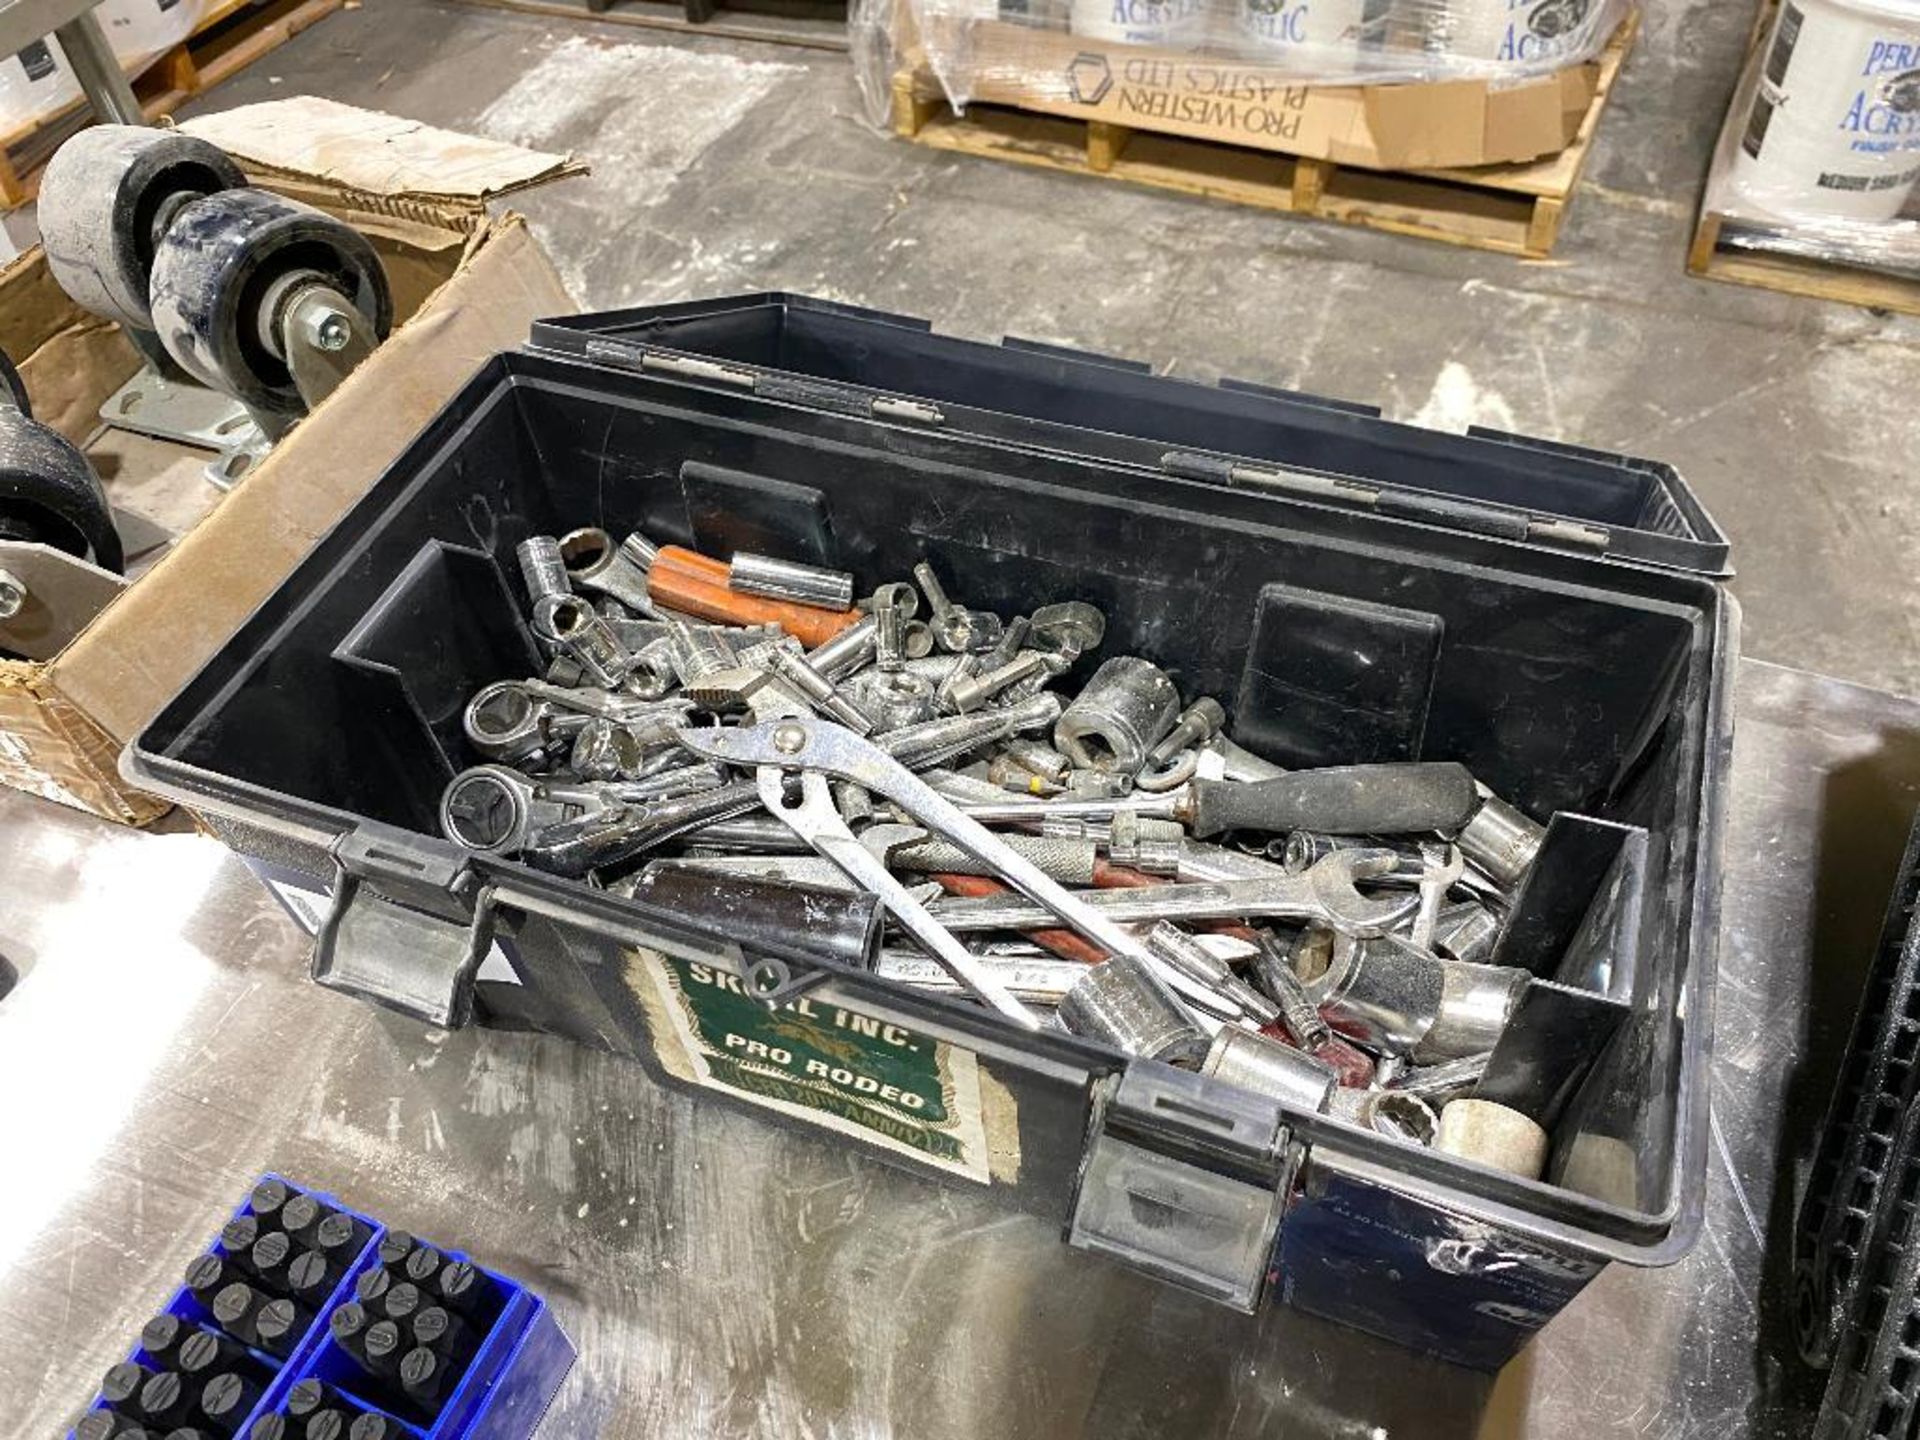 Tool Box w/ Asst. Wrenches, Sockets, Ratchets, etc. - Image 2 of 3